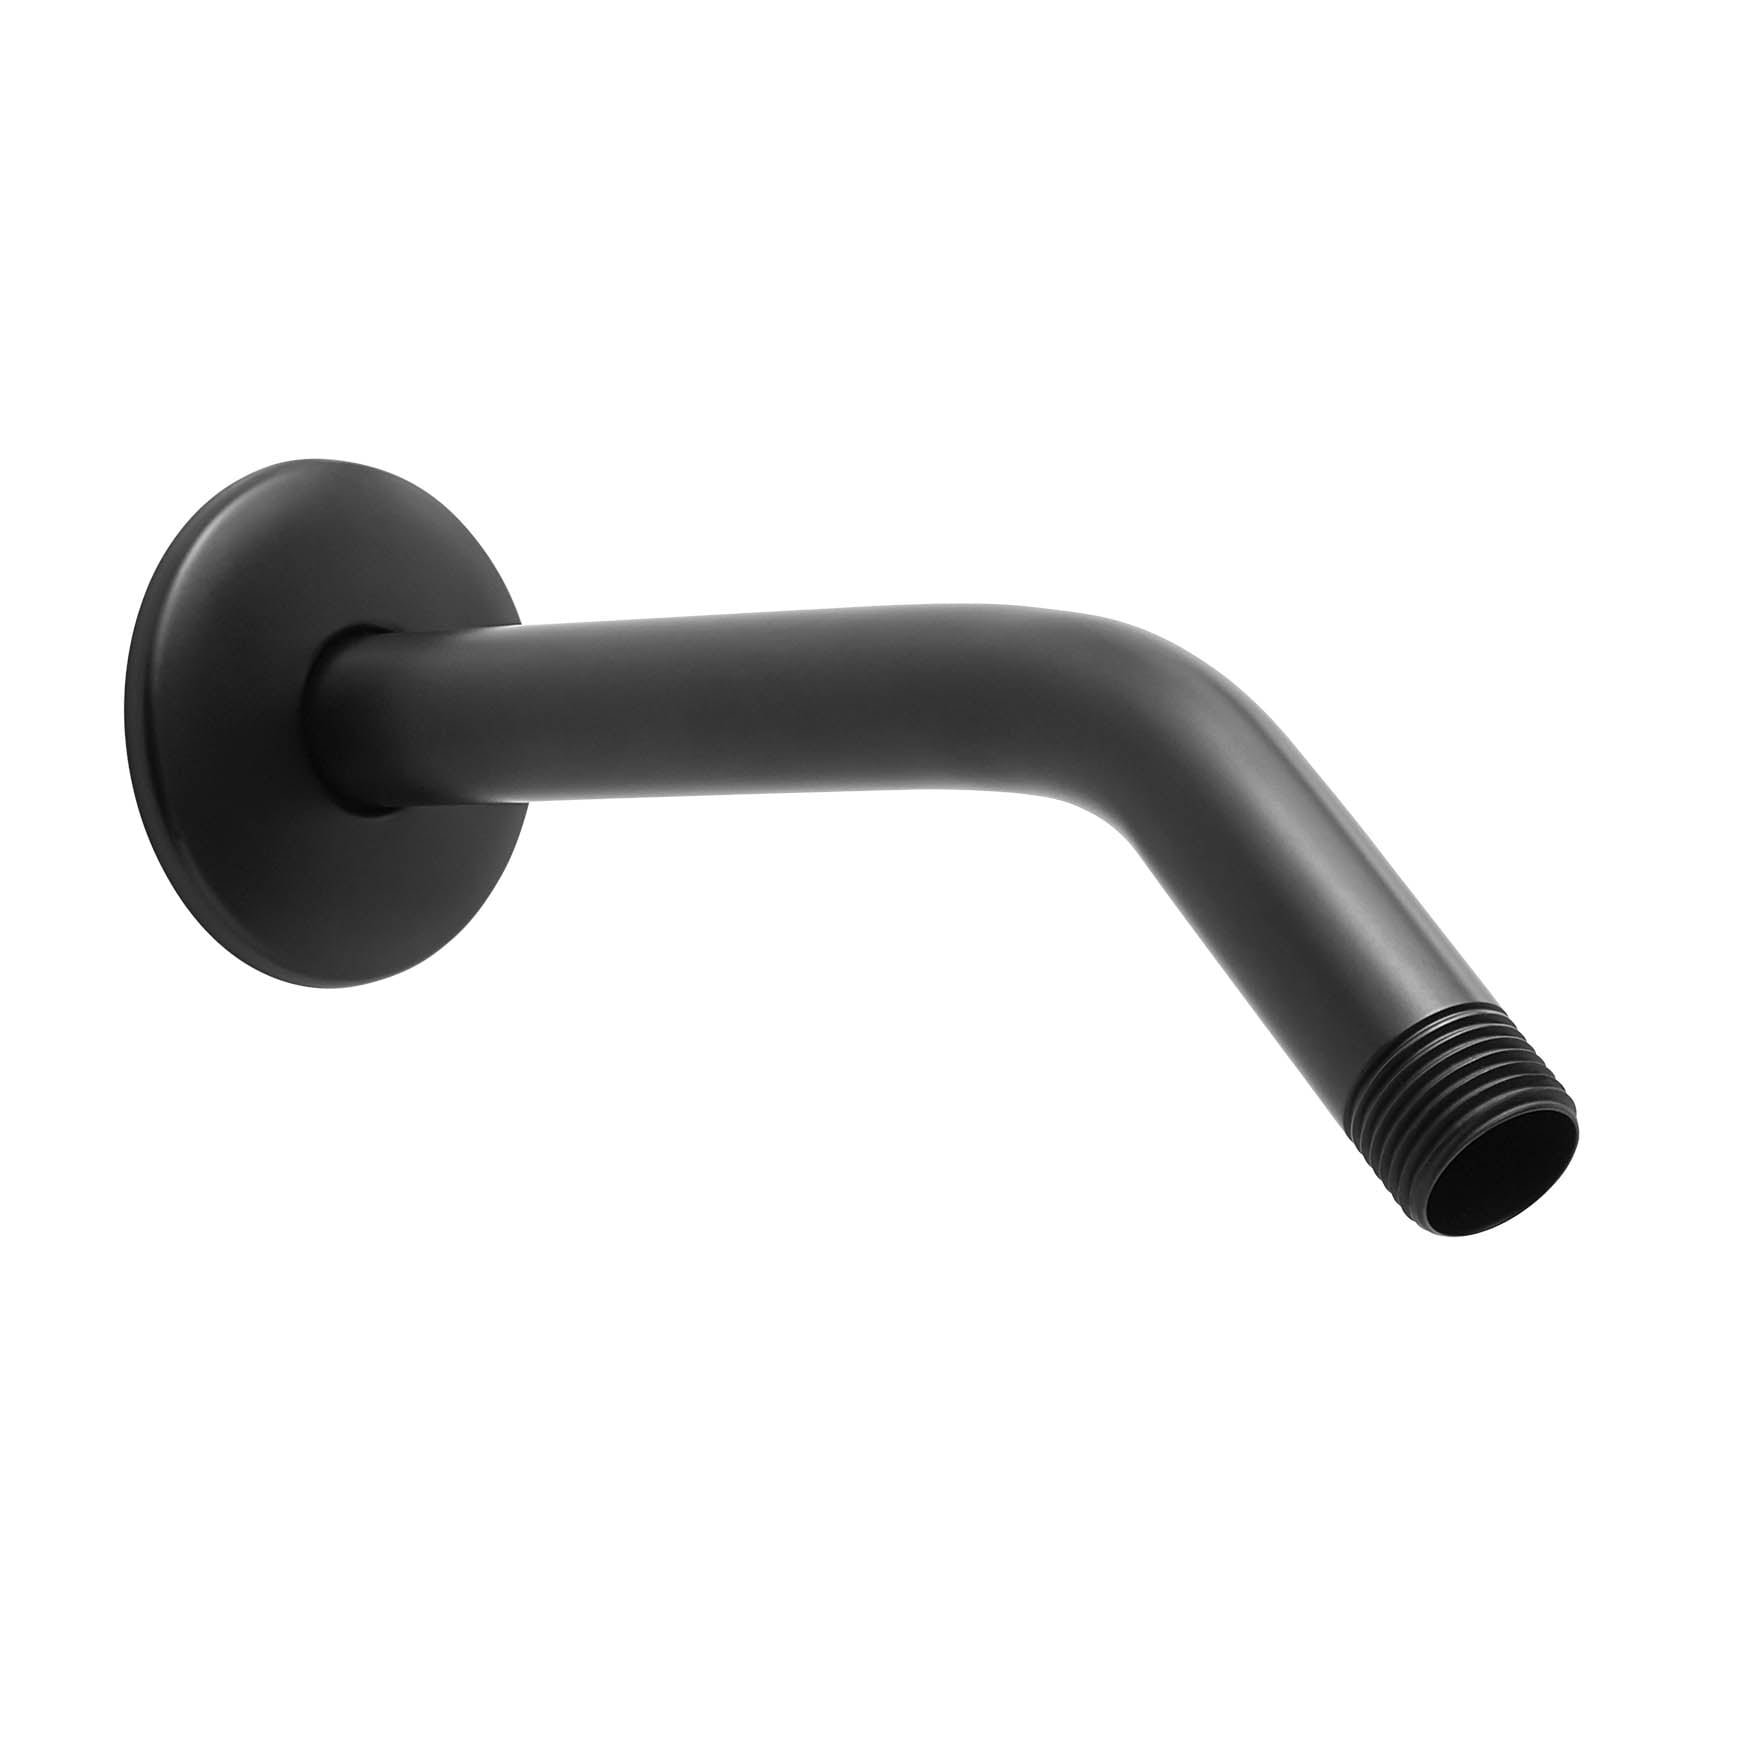 Mainstays 8-in Shower Arm and Flange, Stainless Steel Pipe, Matte Black